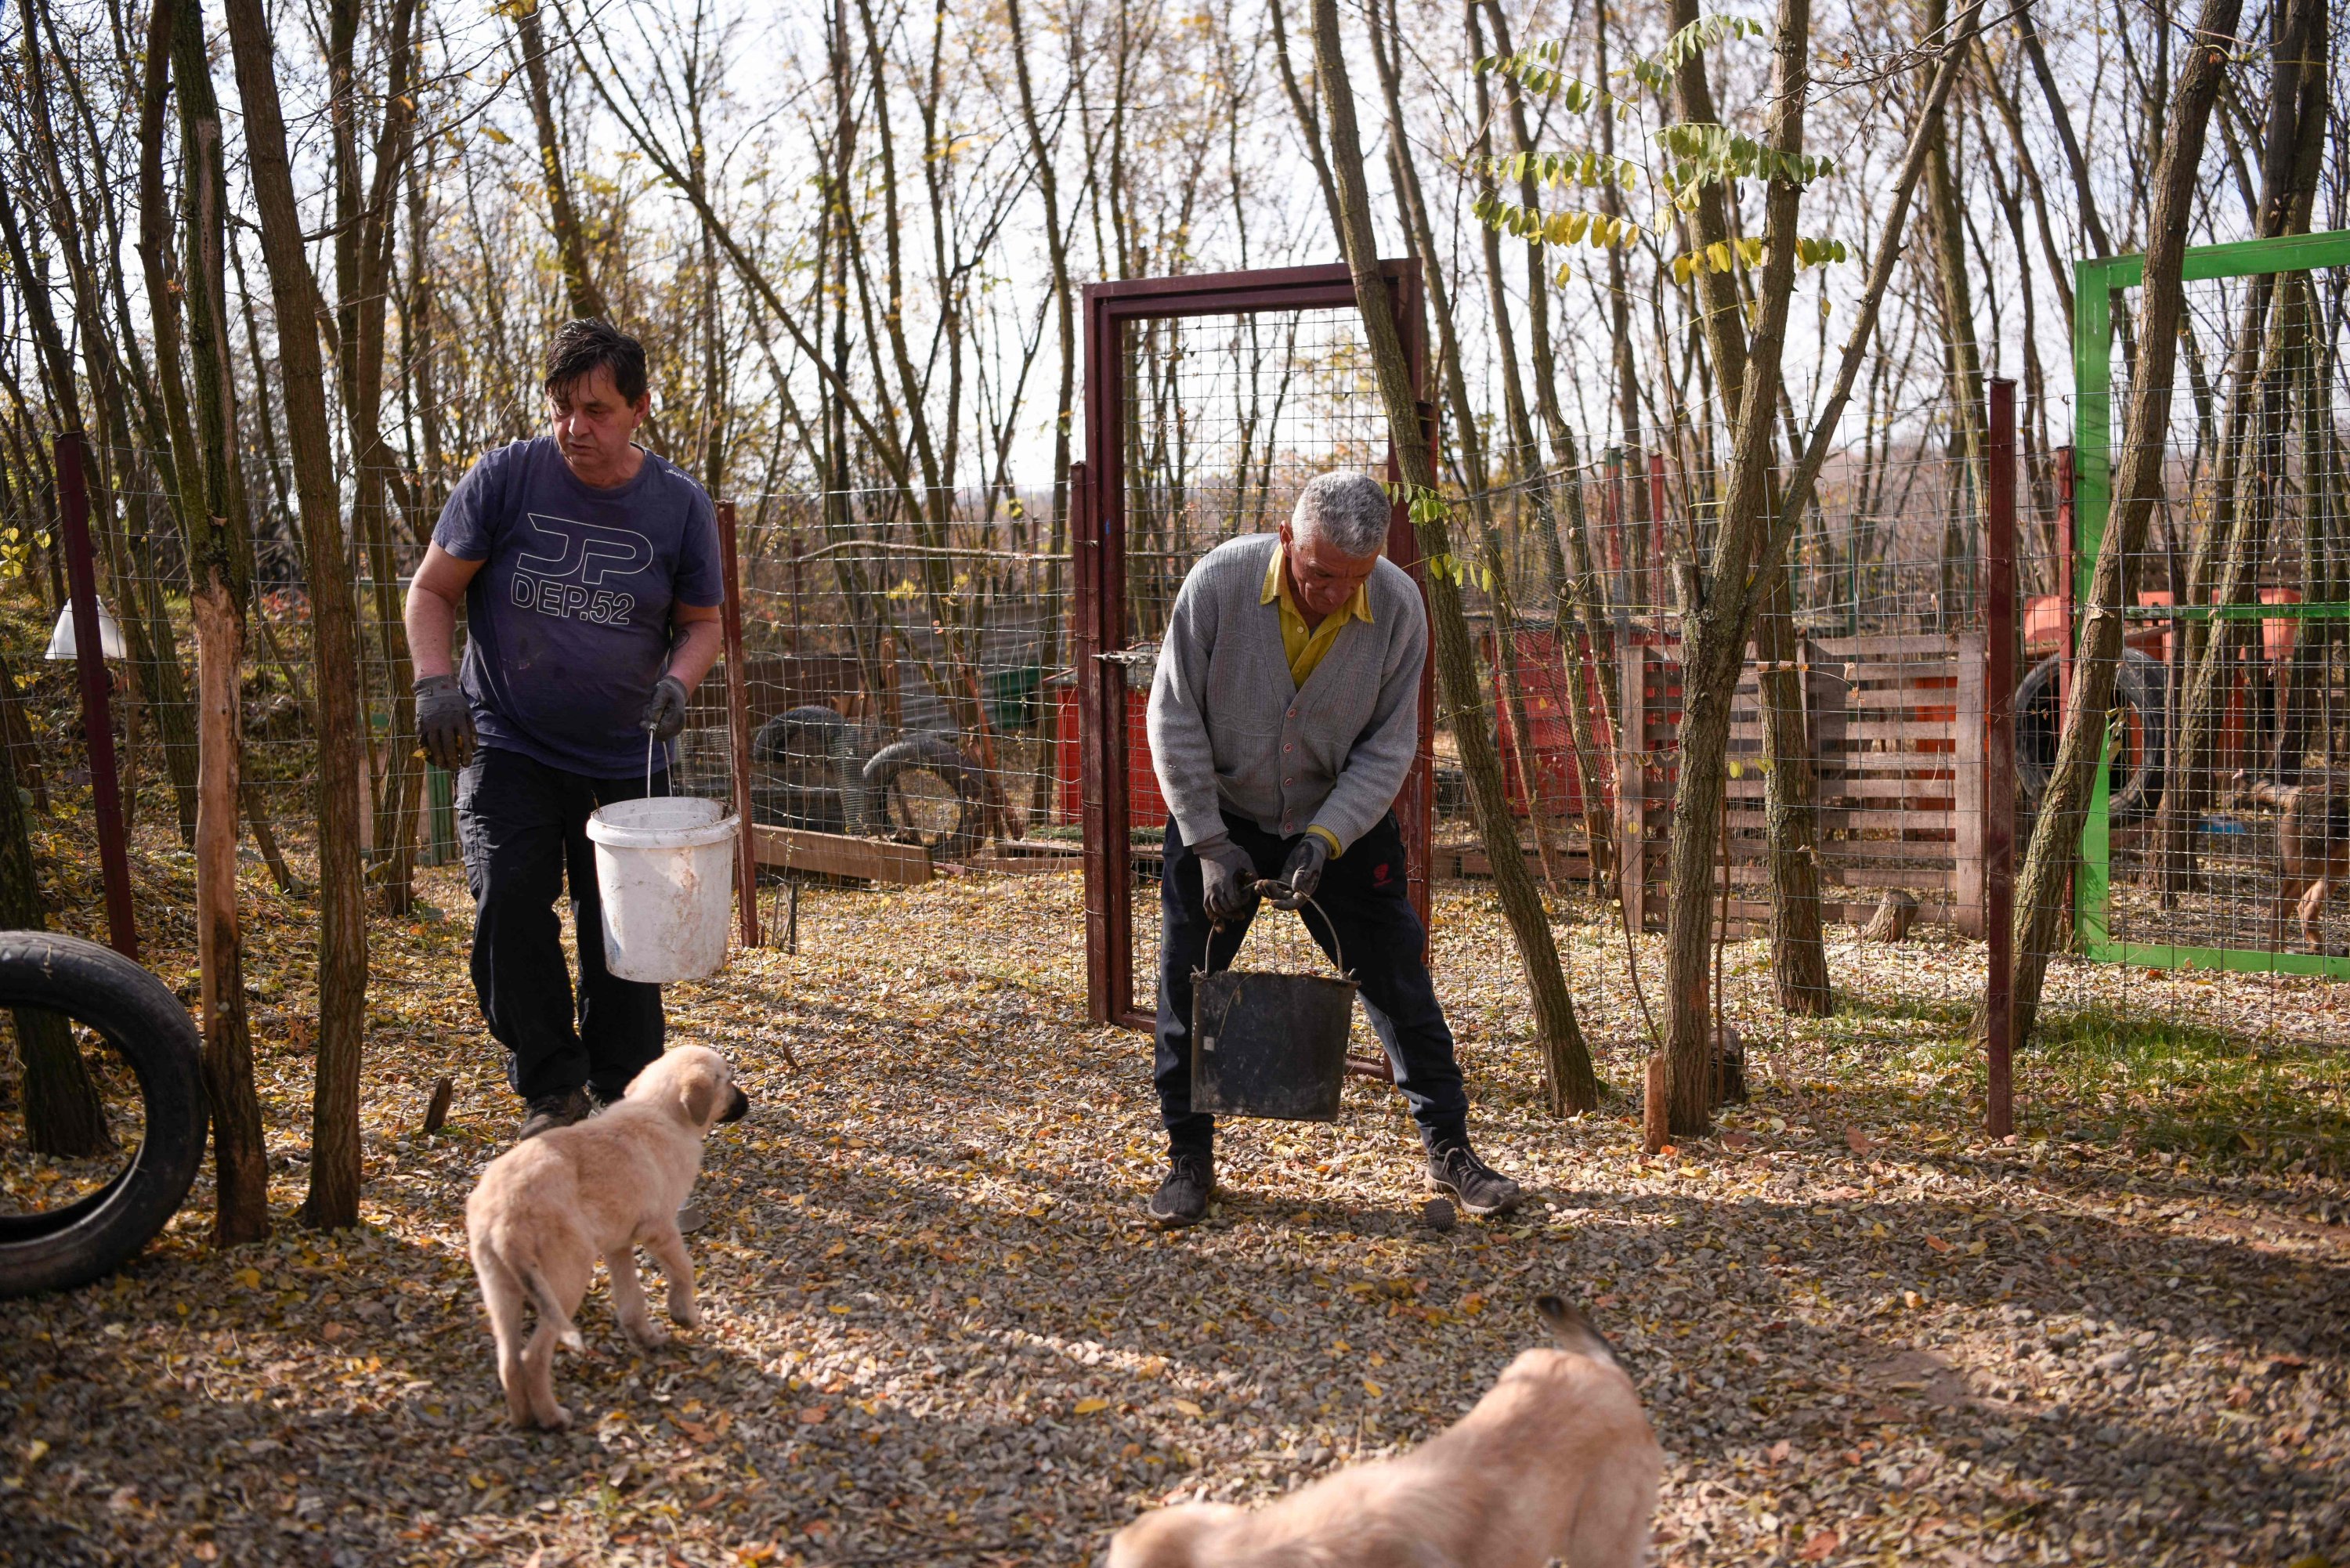 Albanian founder of the Pristina Dog Shelter Mentor Hoxha (L) and his Serbian counterpart Slavisa Stojanovic (R) work together at their shelter near the town of Gracanica, Kosovo, Nov. 12, 2021. (AFP Photo)